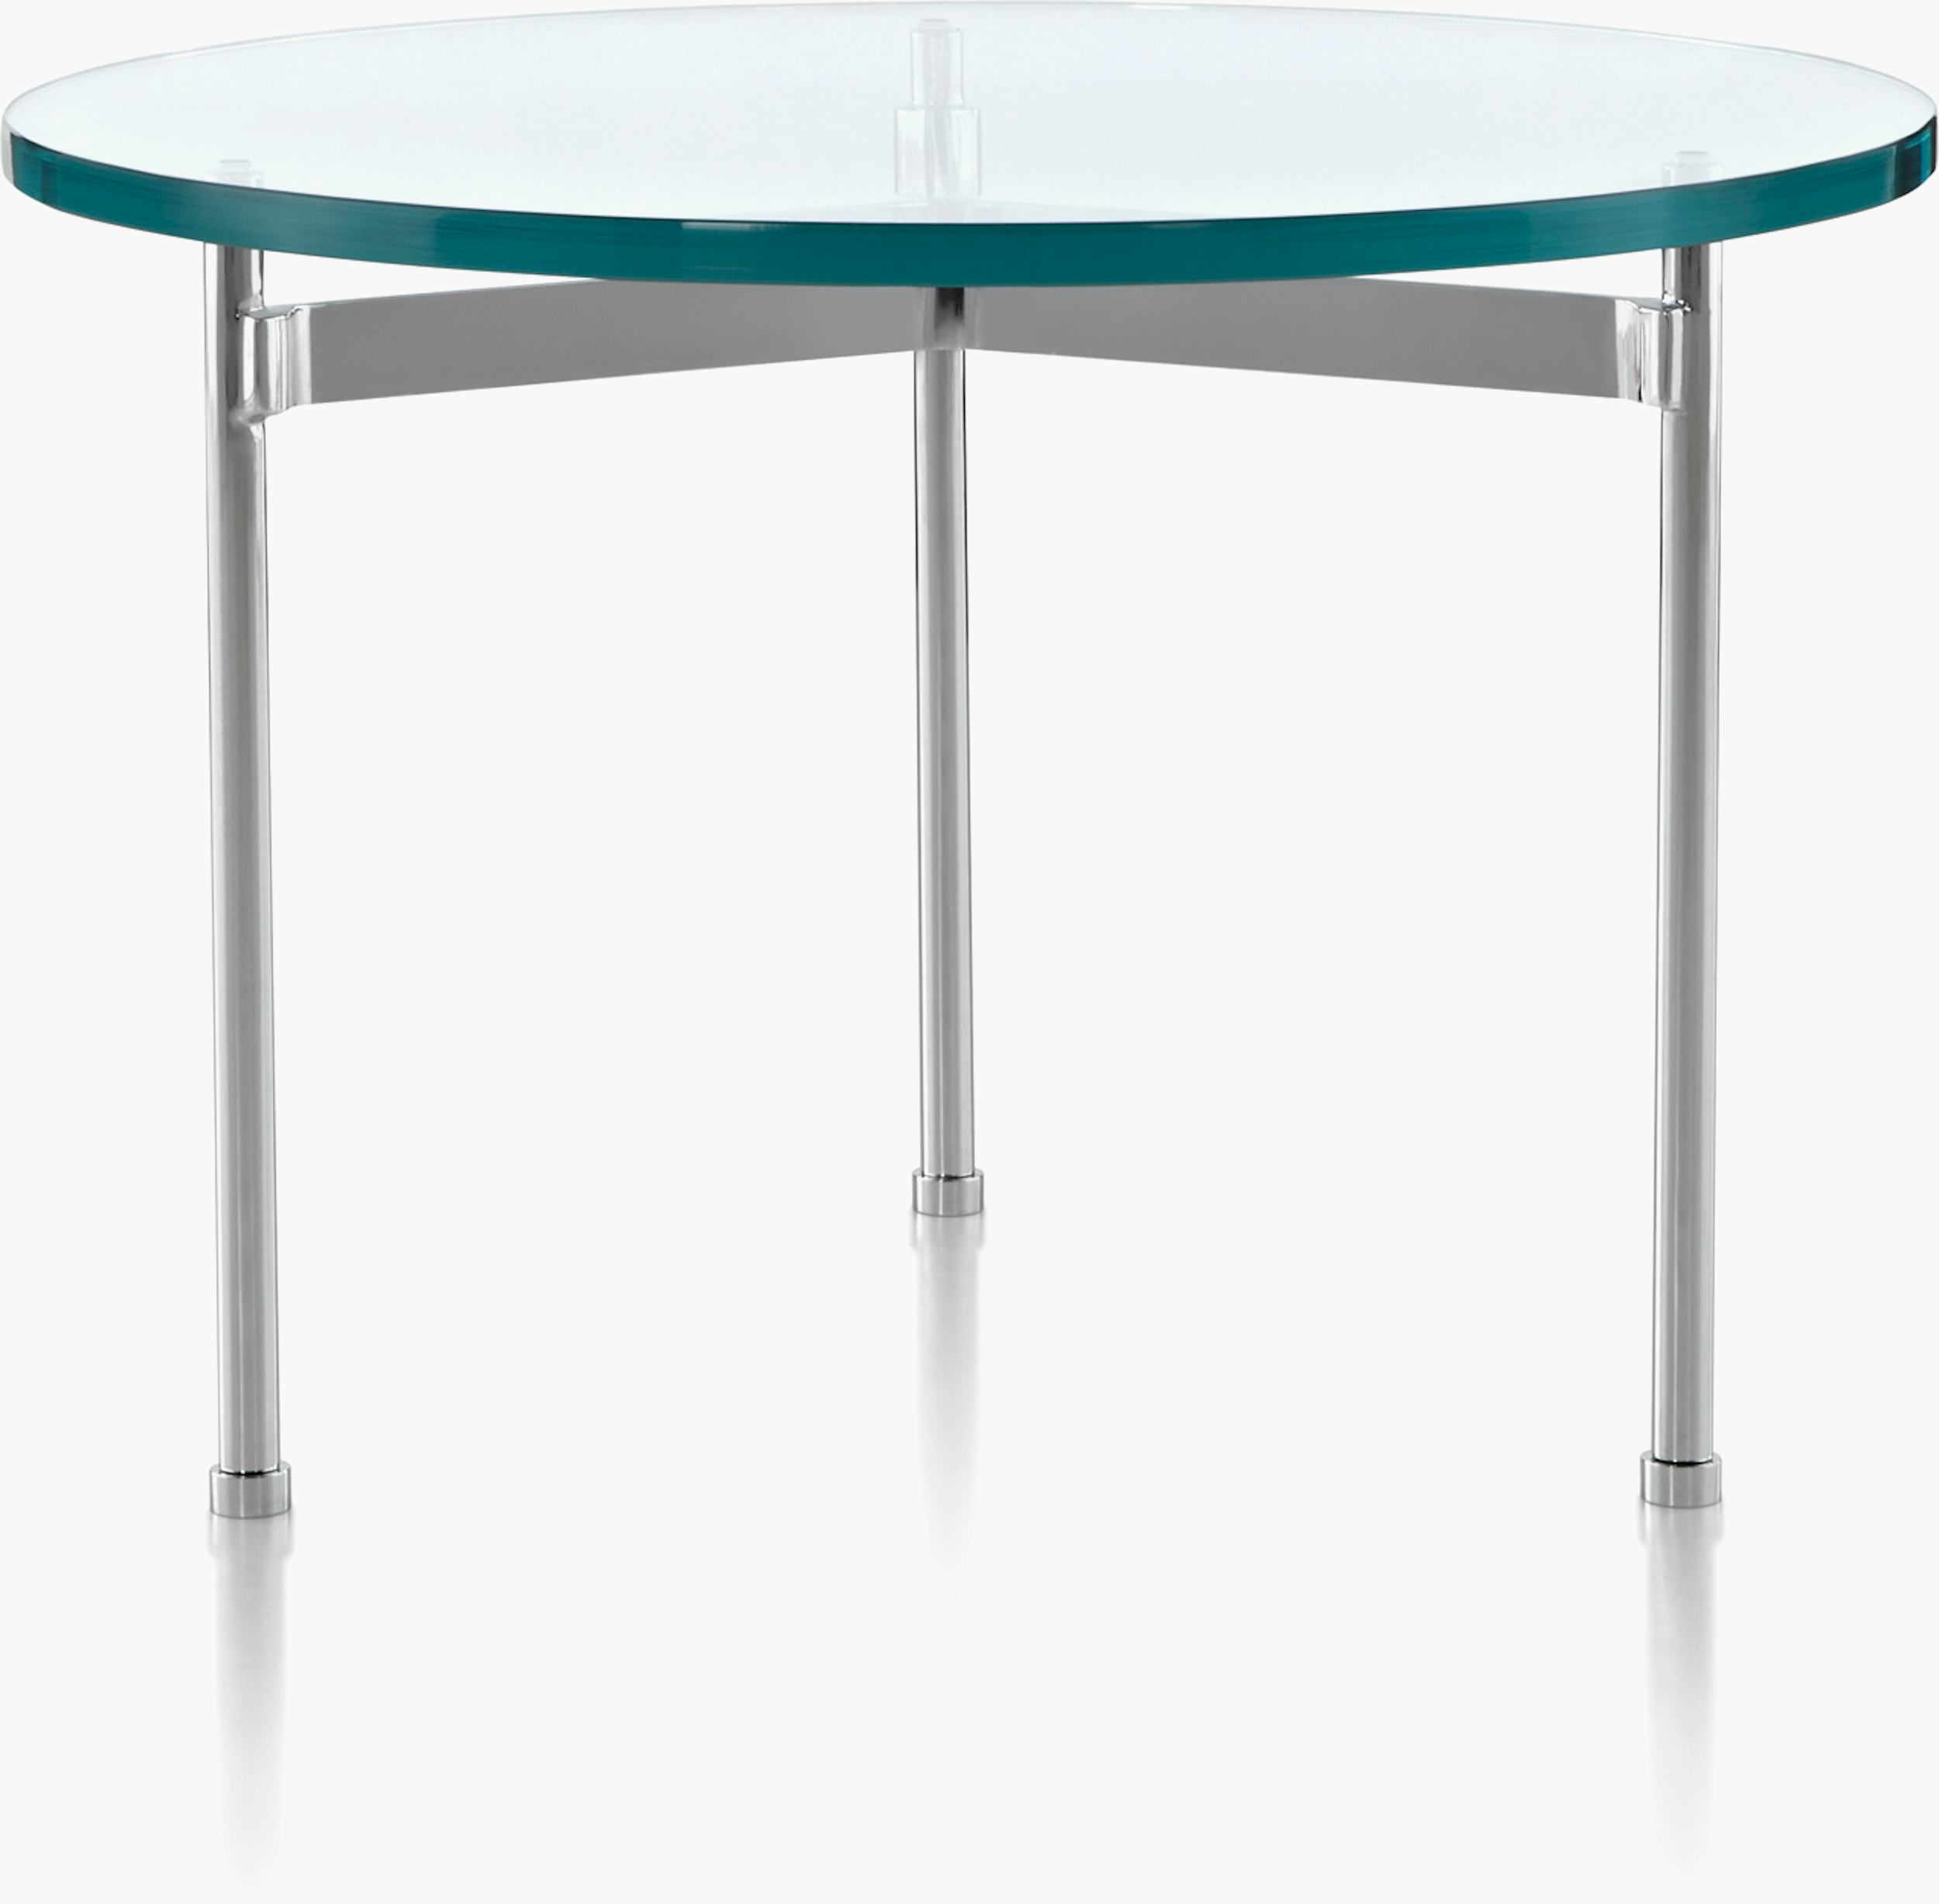 Claw Table Design Reach – Within